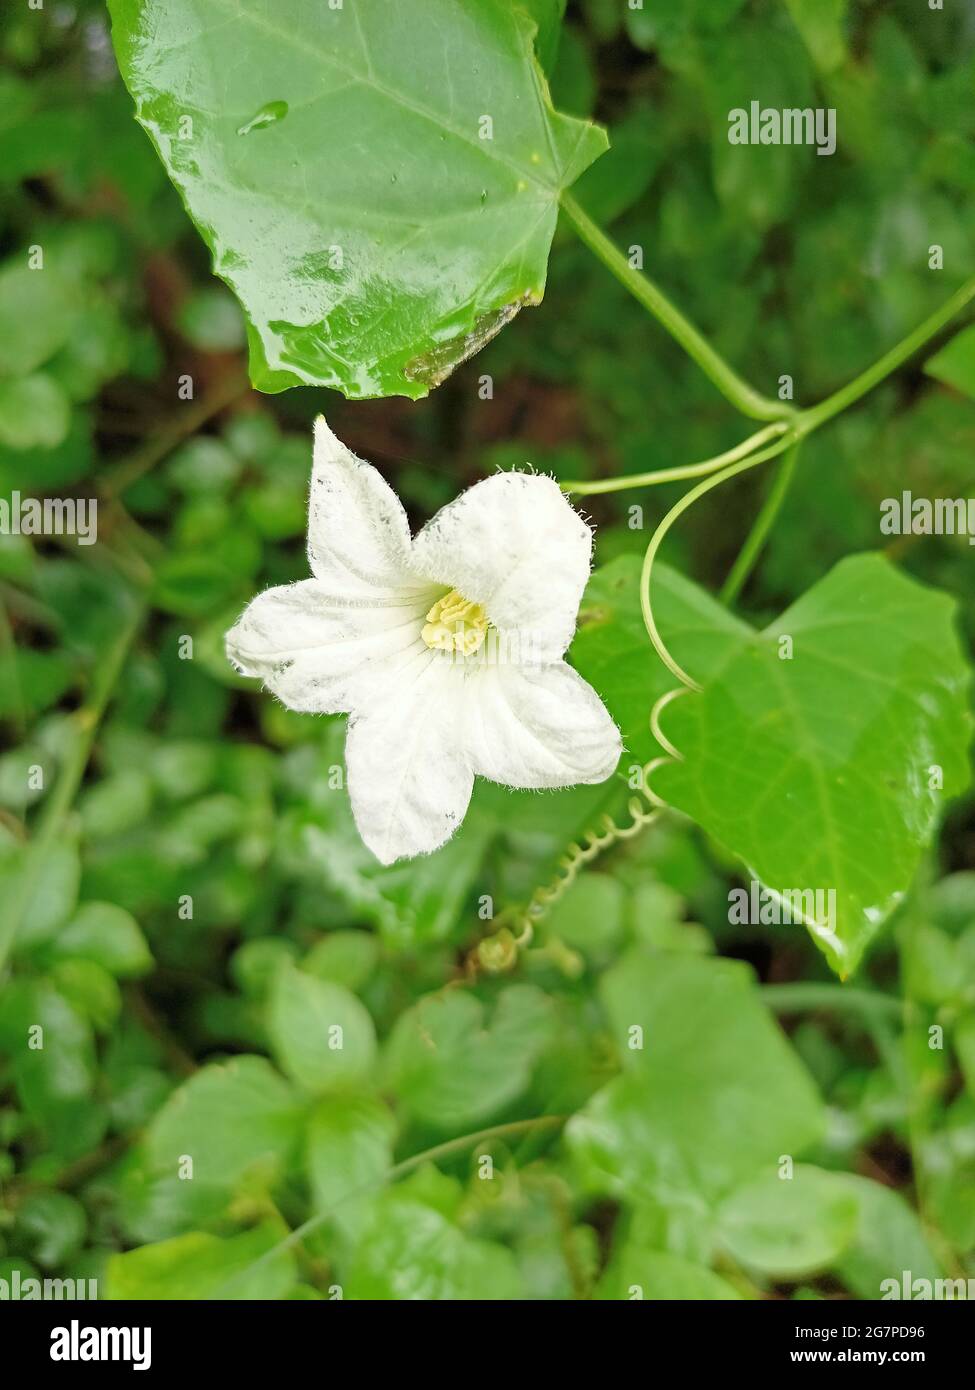 Vertical shot of a white Coccinia grandis flower with green leaves in the background Stock Photo